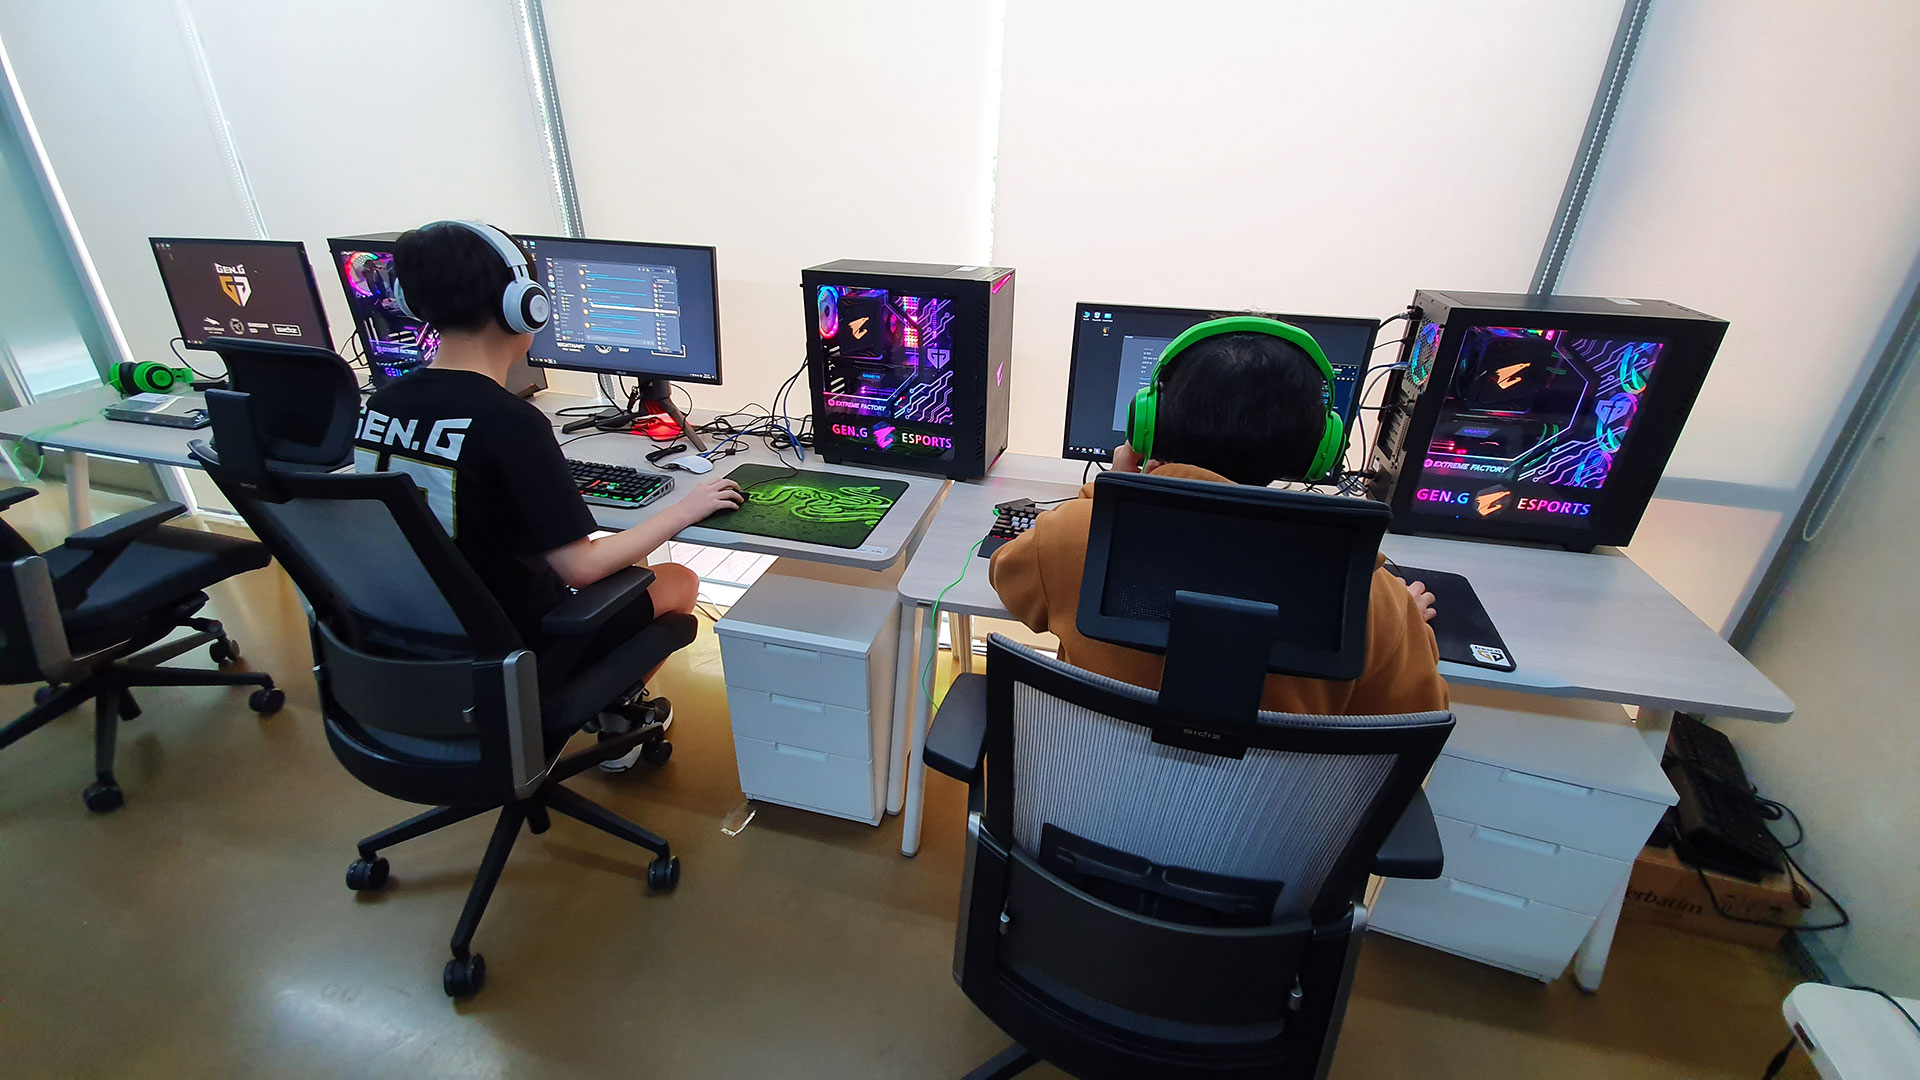 The Day In The Life Of A Professional Esports Player